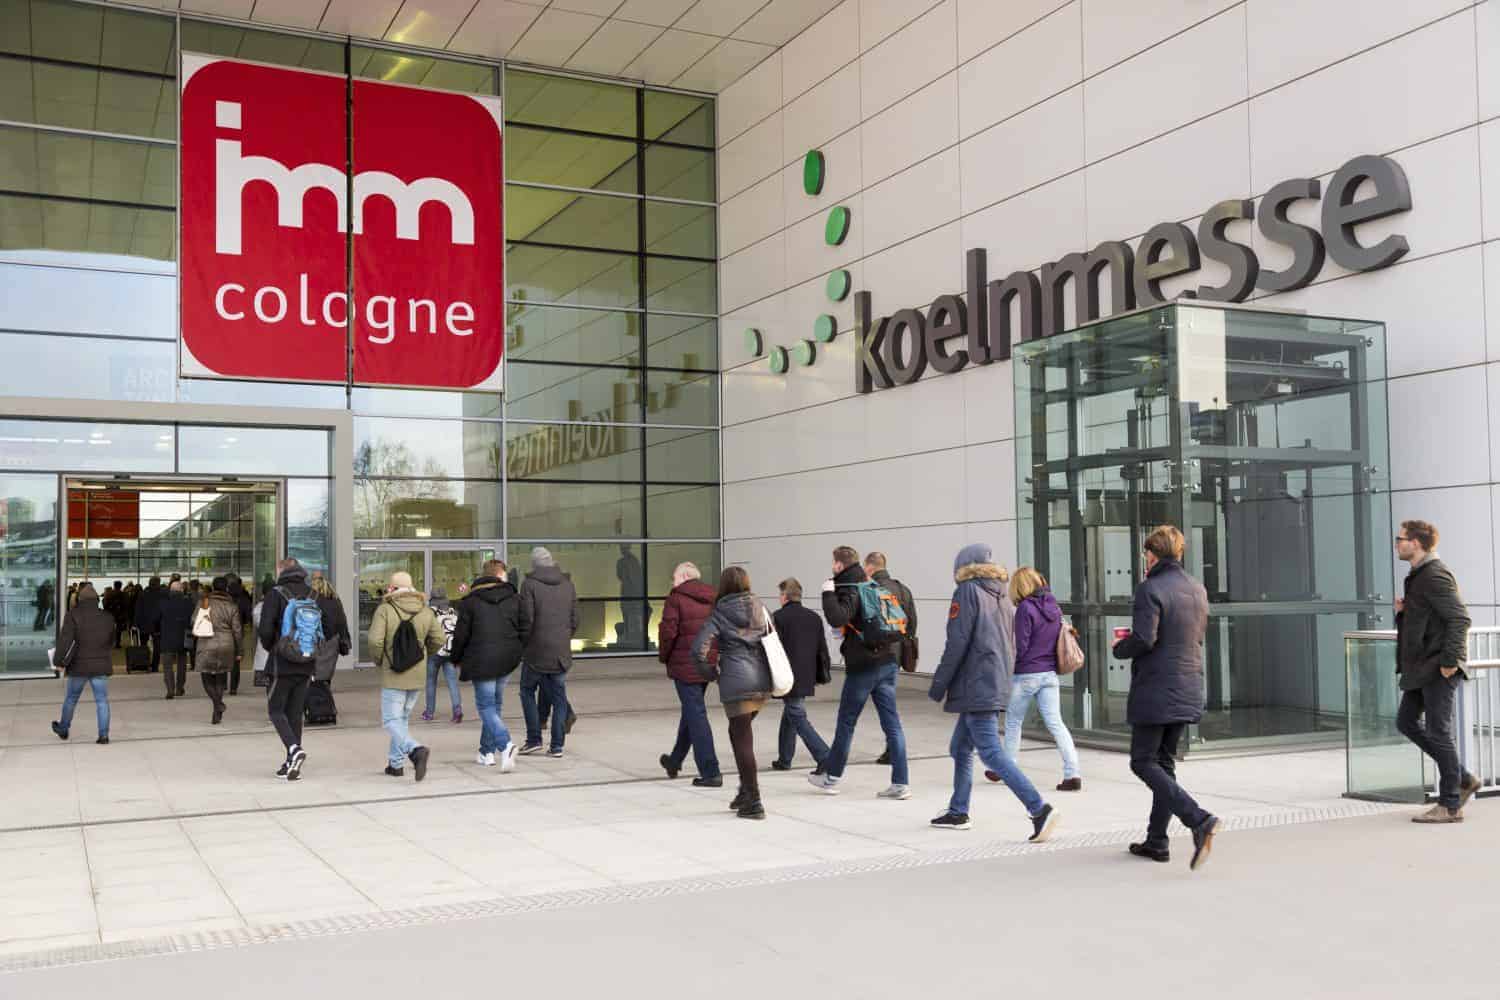 " IMM Cologne 2022, interior design show will take place from 17 - 23 January at Koelnmesse GmbH, Cologne Hall 2 - 11.